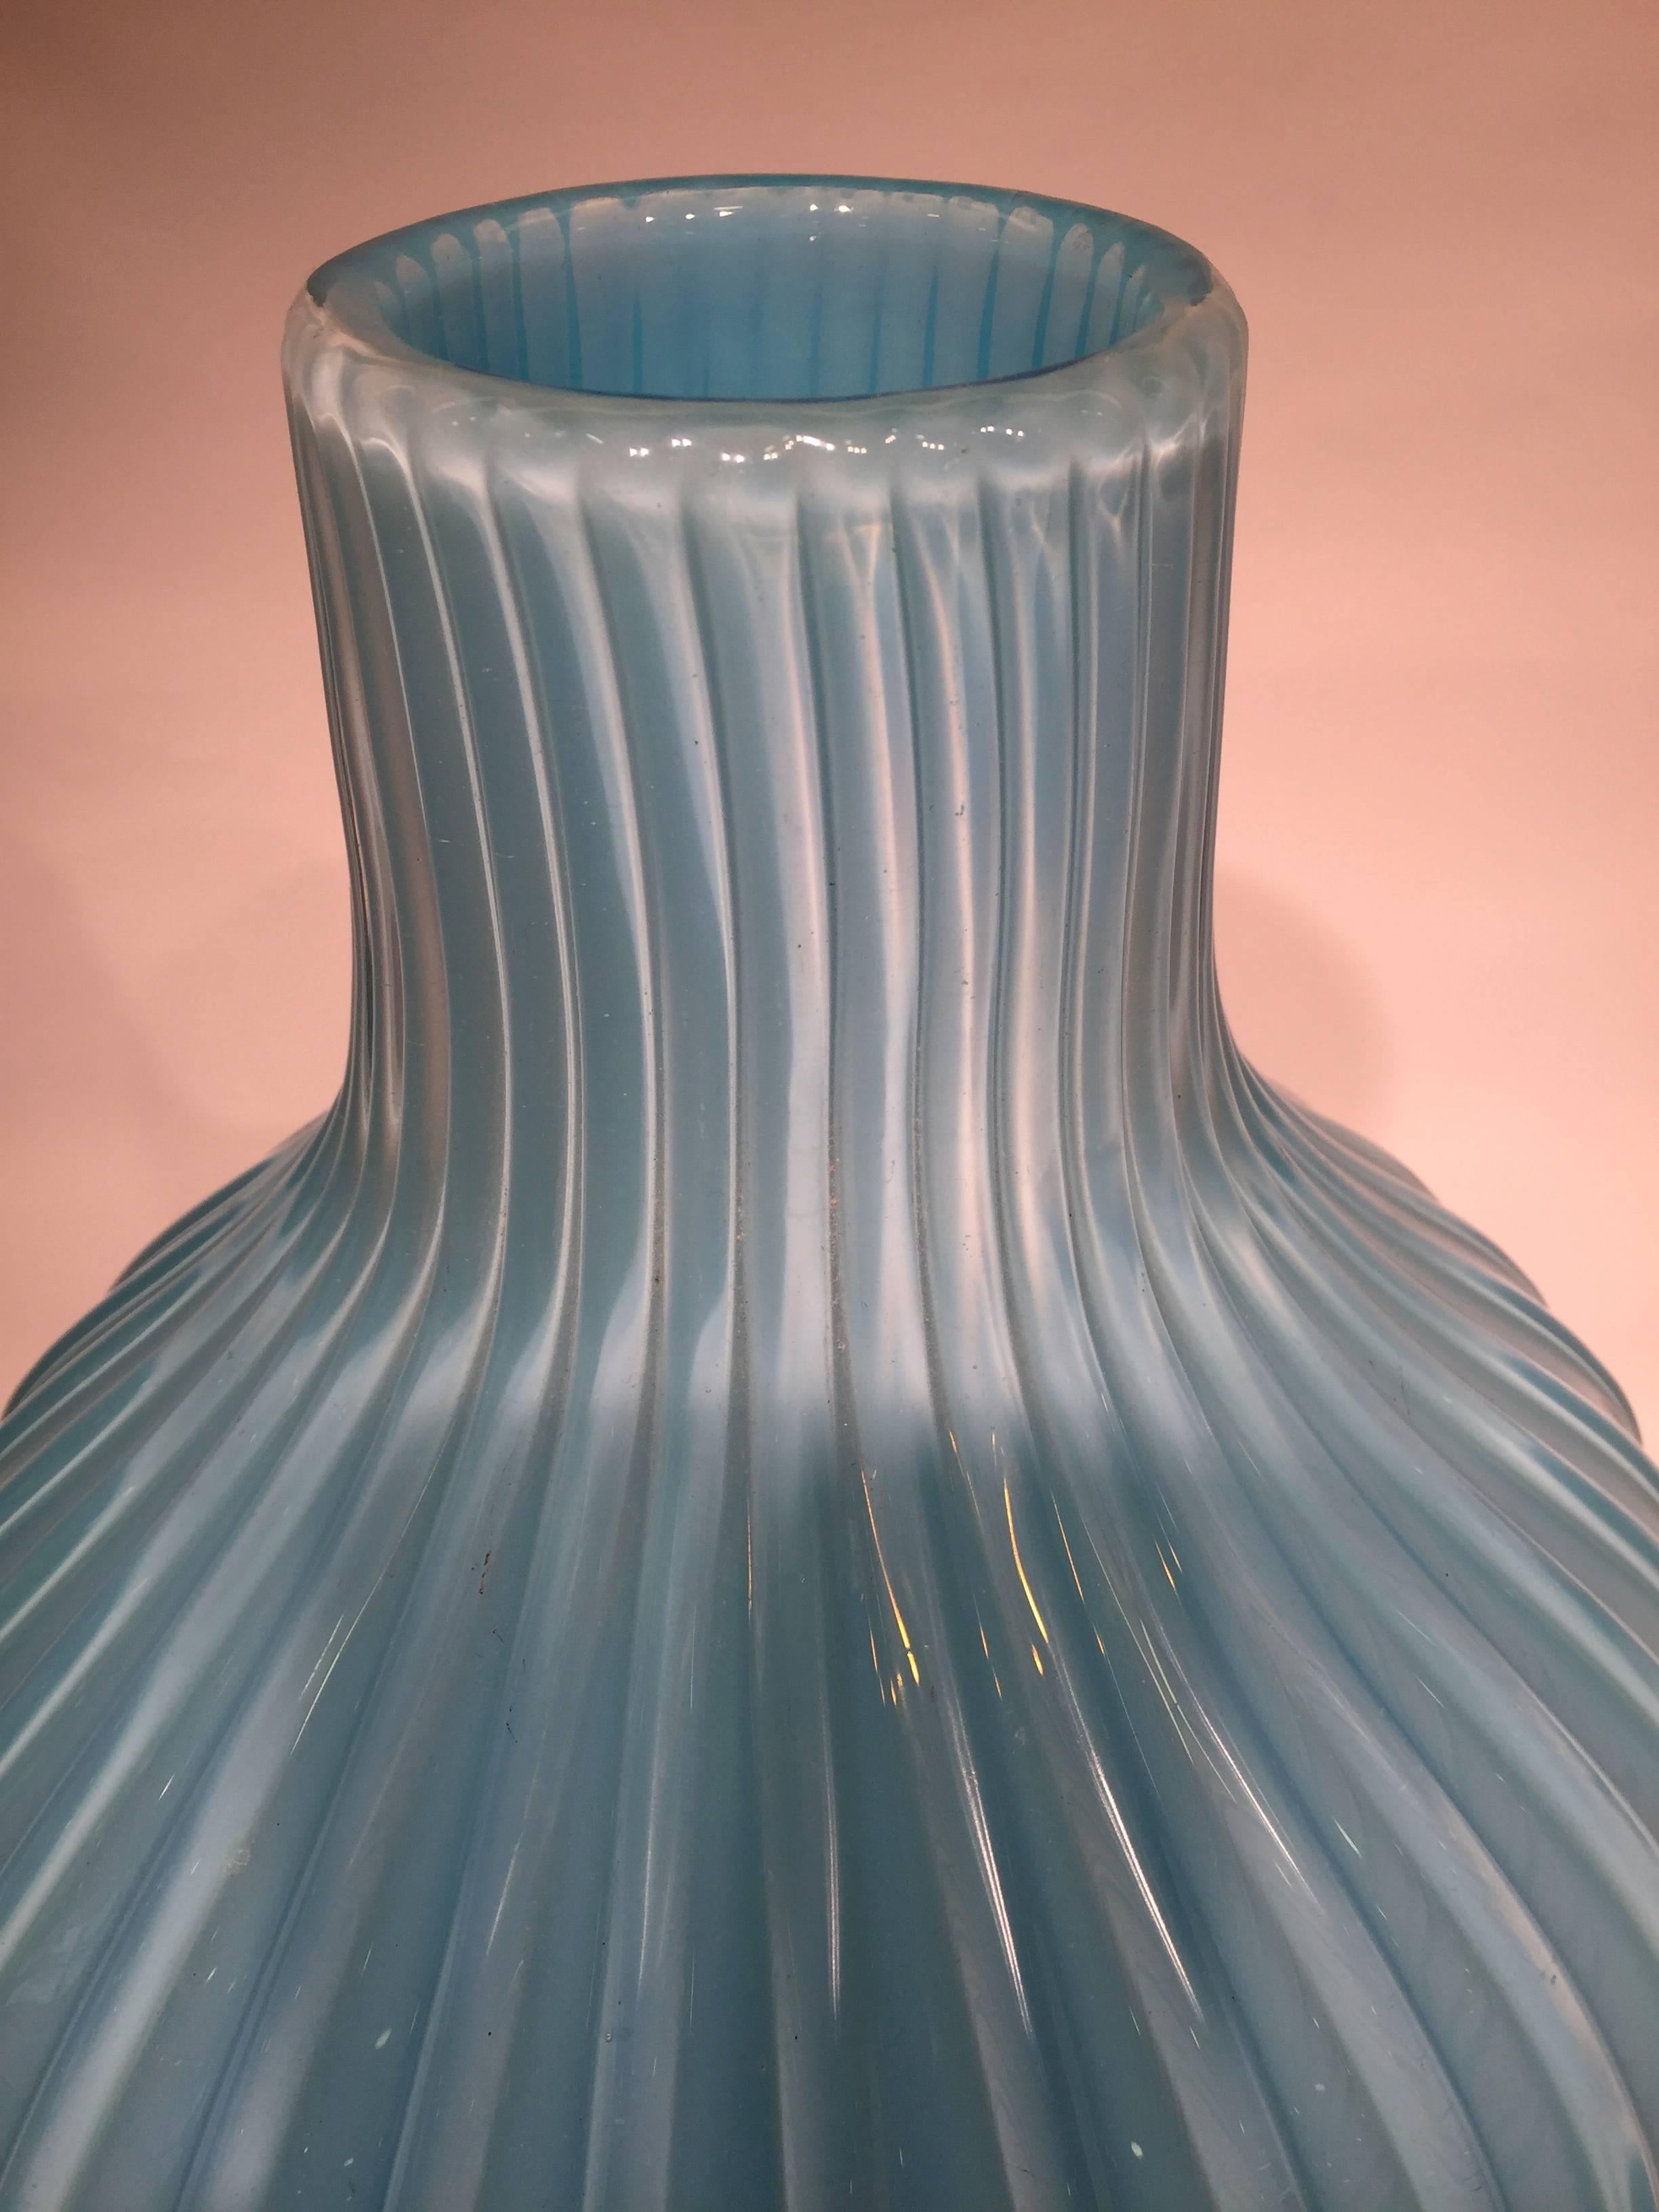 This vase is rare and tall Barovier & Toso, artistic blown glass of Murano vase, circa 1950.